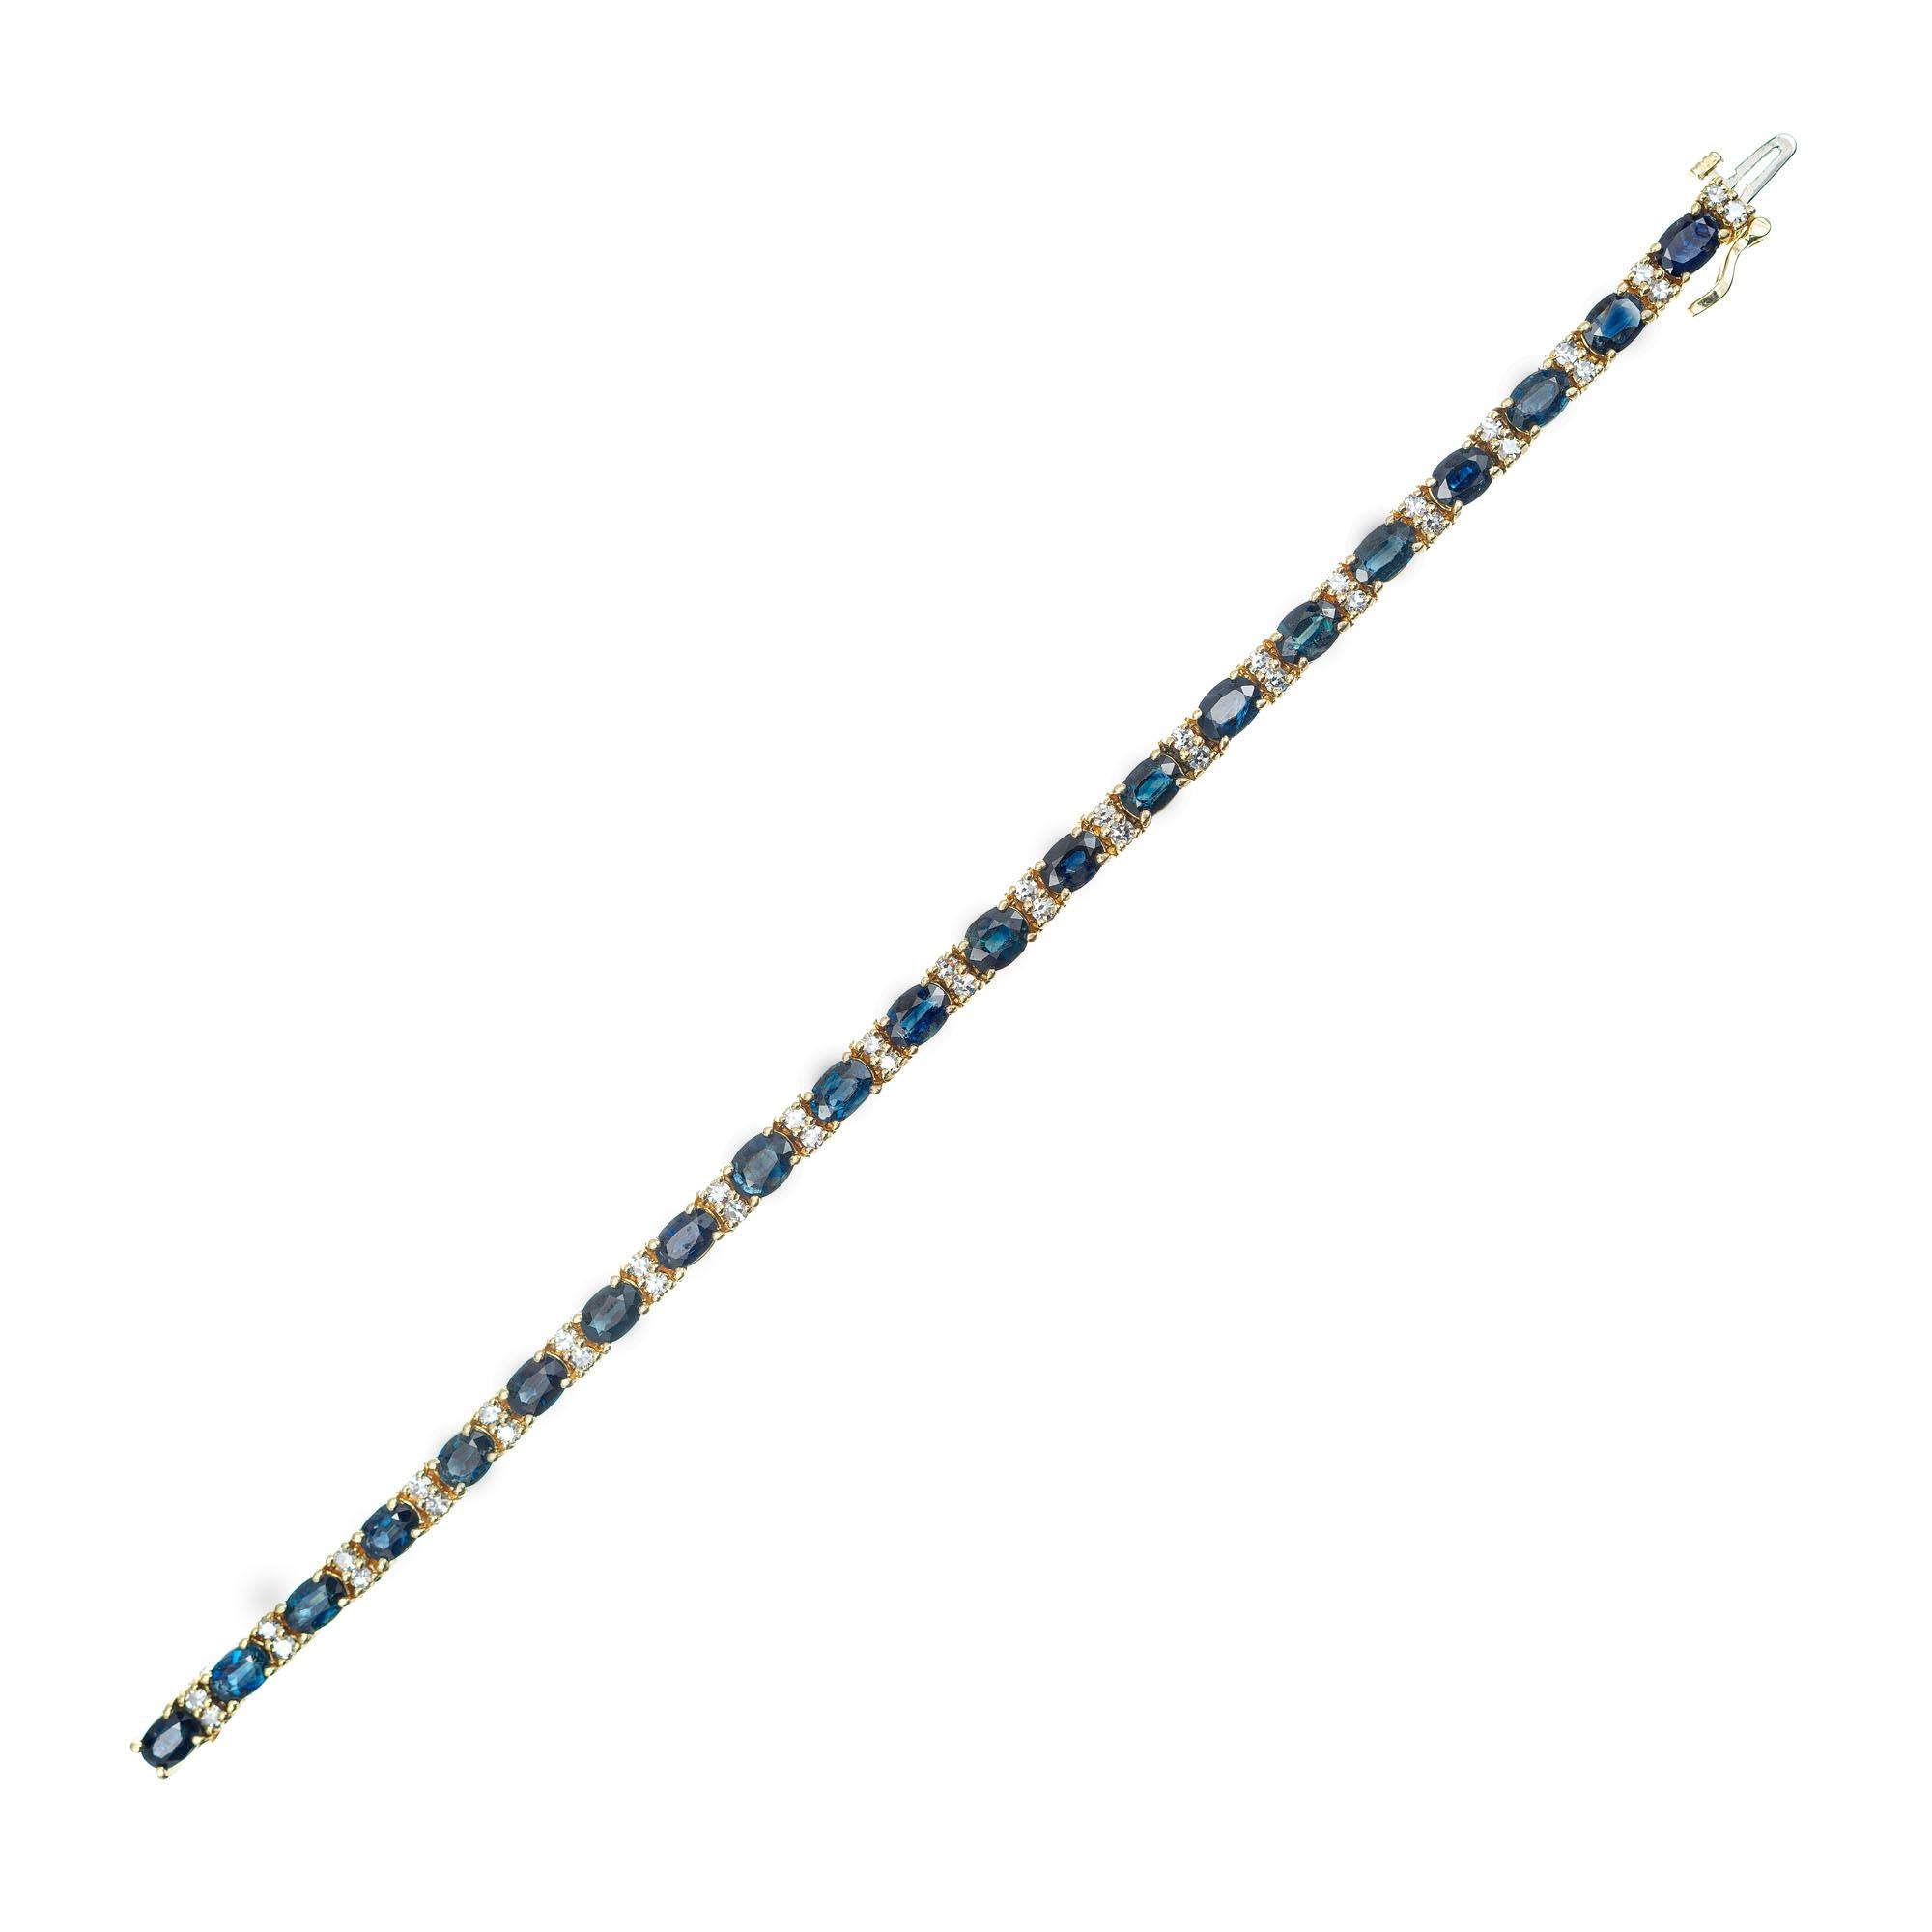 Sapphire and diamond hinged link bracelet. 21 oval sapphires separated by 42 single cut diamonds in a 14k yellow gold tennis bracelet setting. 7.75 inches long. 

21 genuine 6 x 4.5mm Royal blue Sapphires. Approx. 14.00cts total, natural color